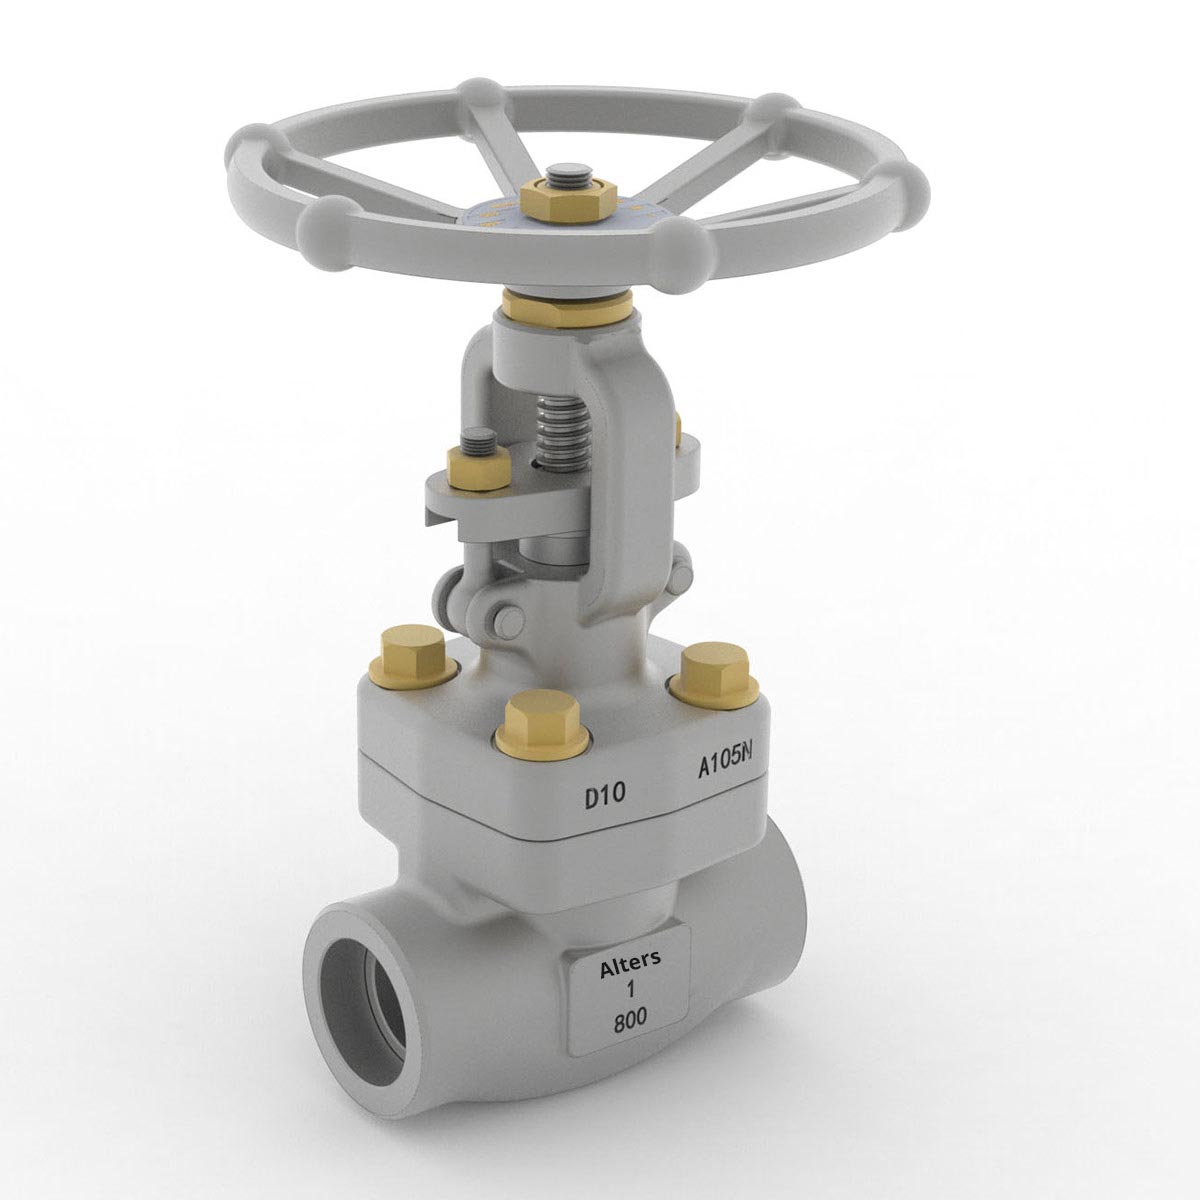 The image showcases a reliable Forged Steel Gate Valve from AlterValve with the company name and specifications for fluid flow control in piping systems.